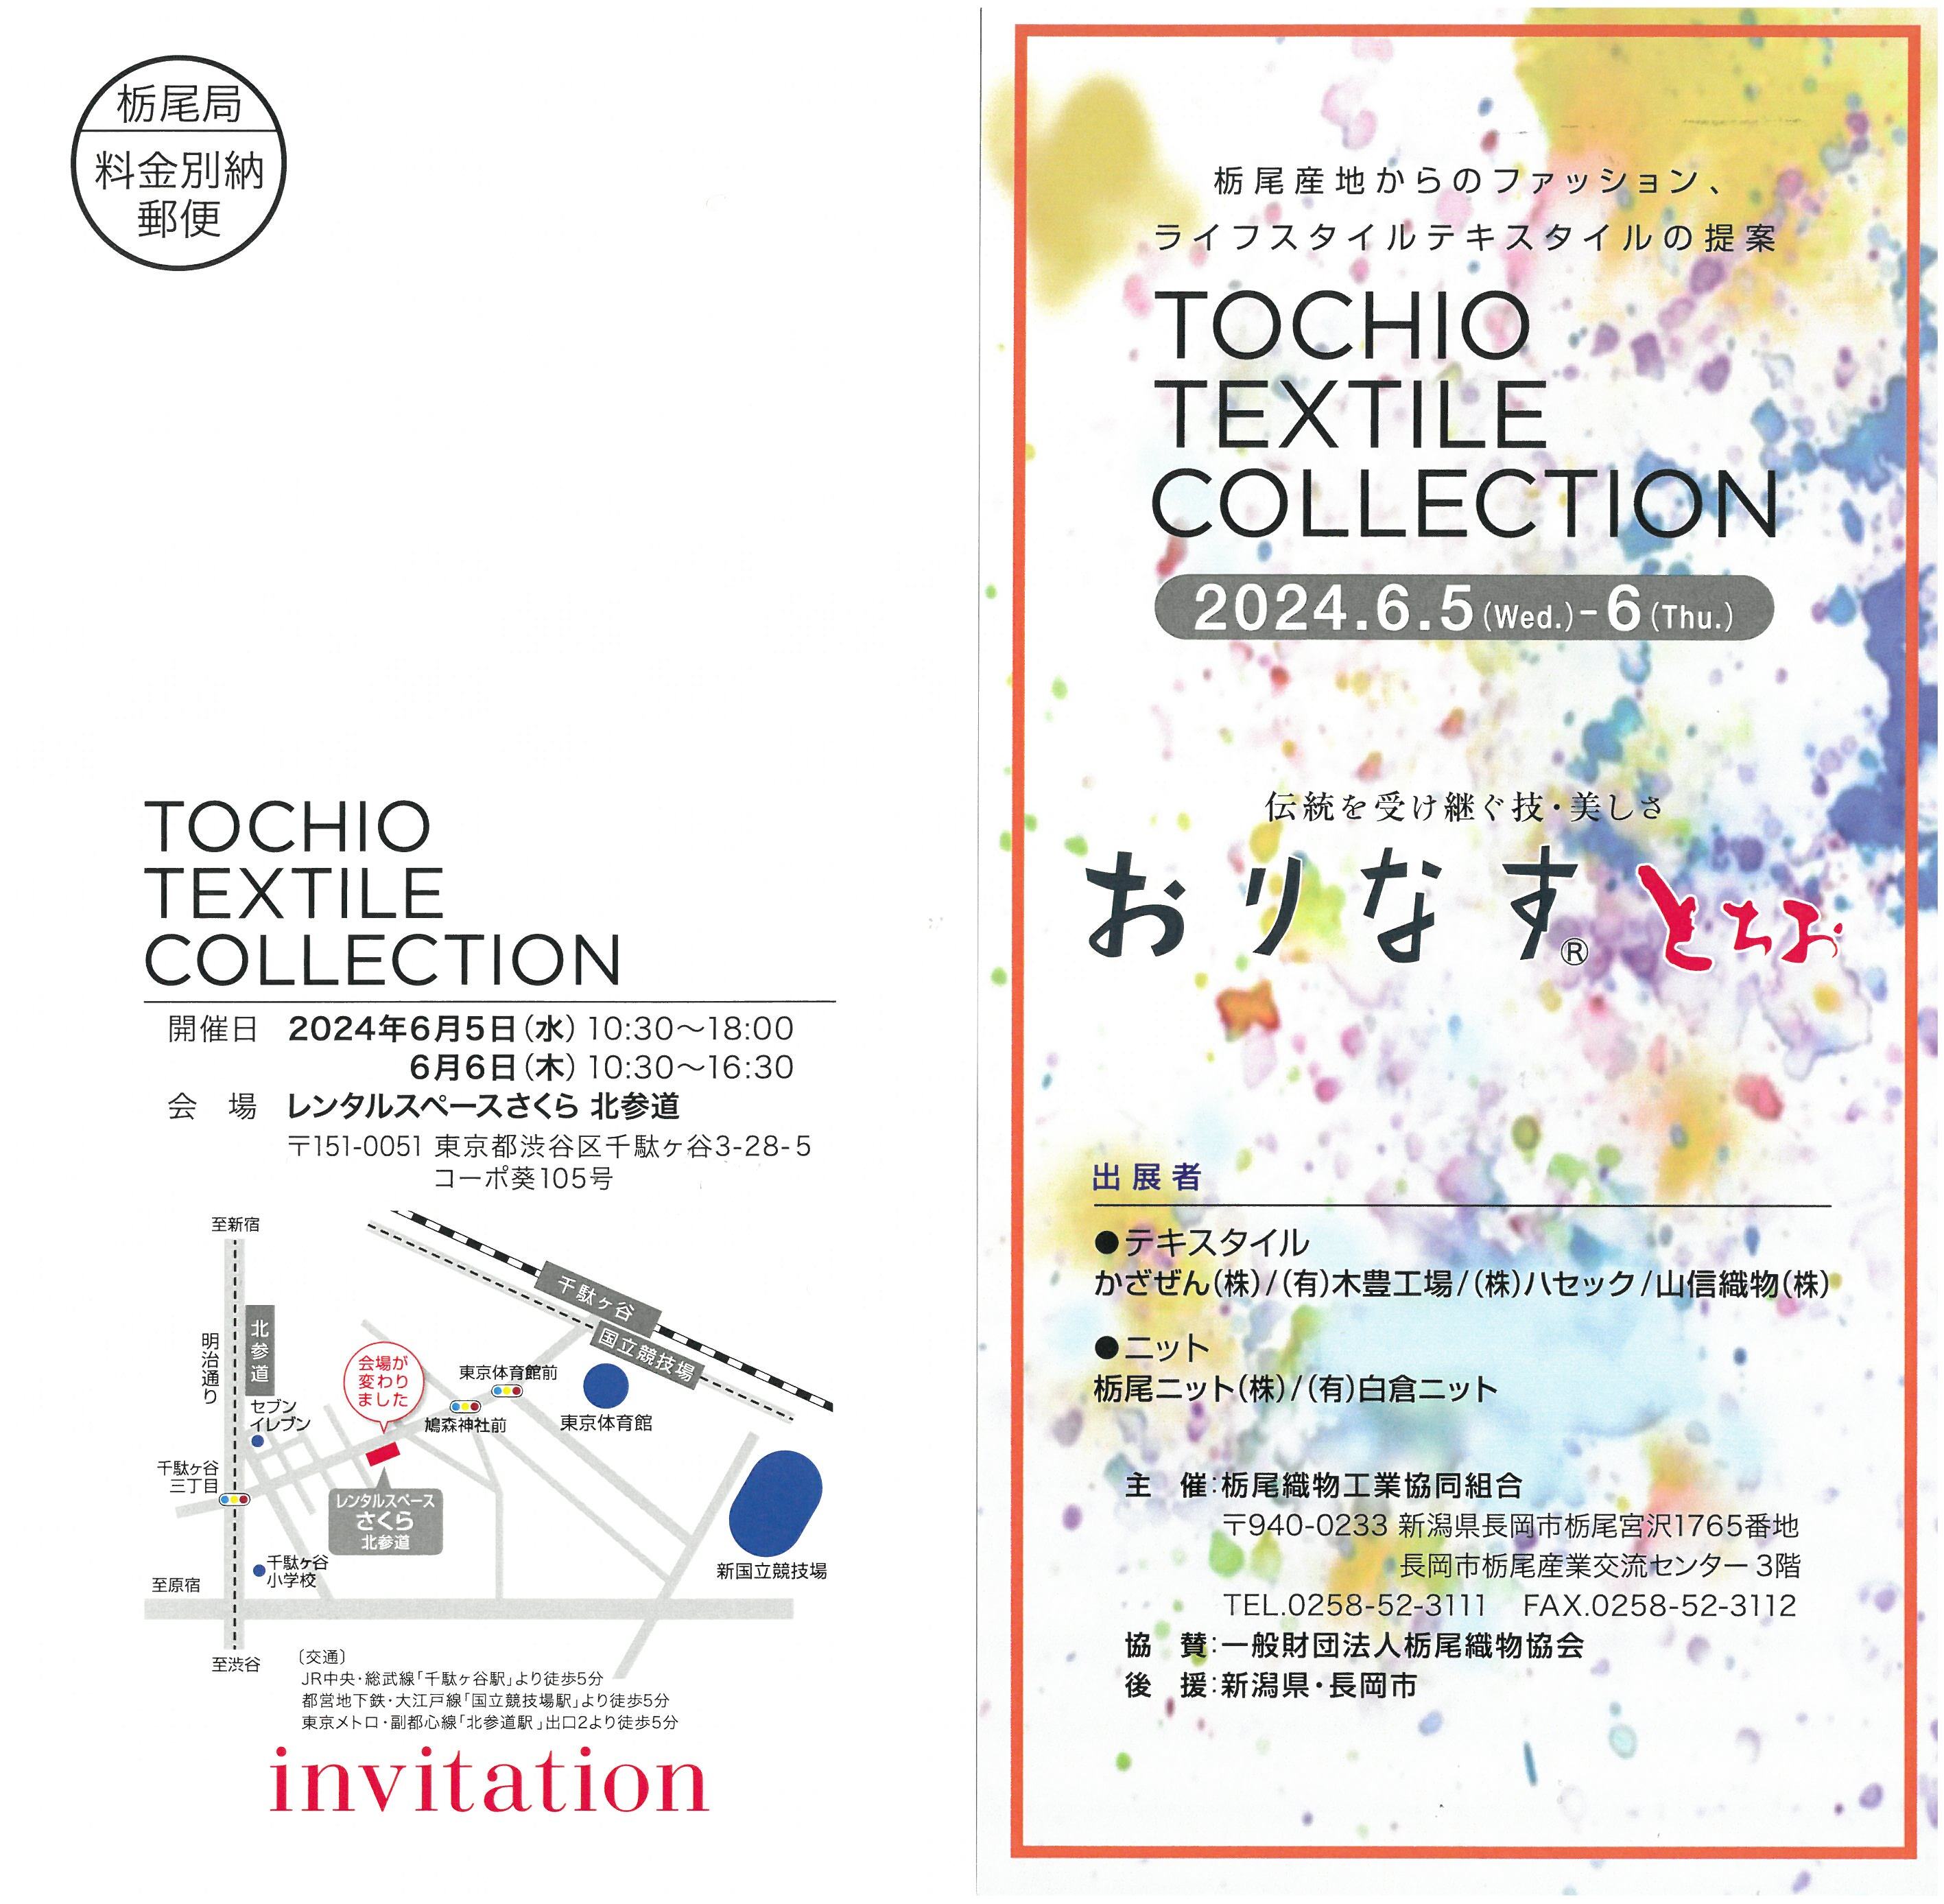 TOCHIO TEXTILE COLLECTION 2025S/S開催のお知らせ